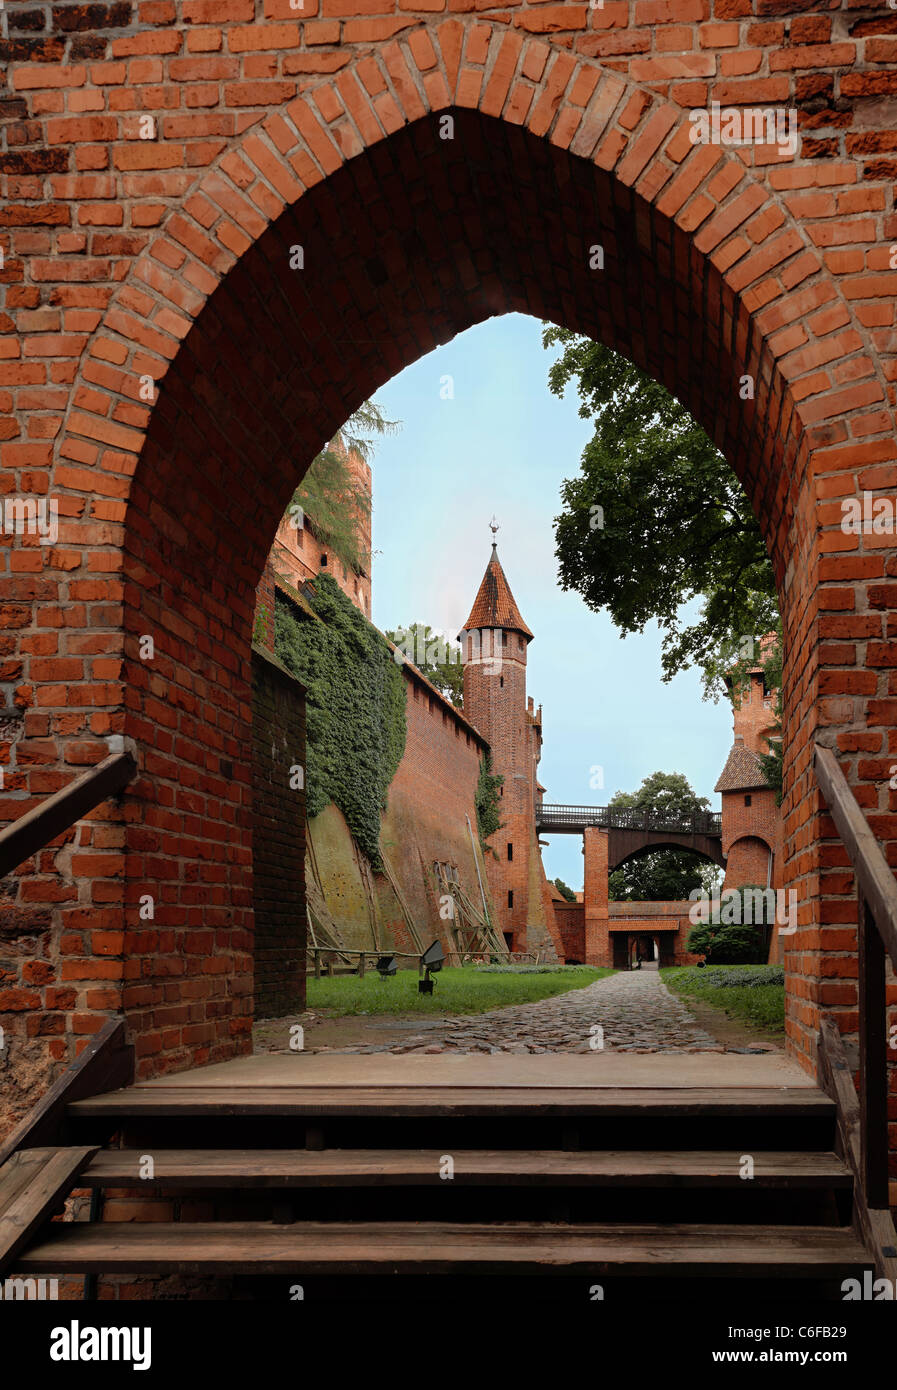 View of the Teutonic Order’s castle in Malbork, inner court. Stitched mosaic panorama in high resolution. Stock Photo